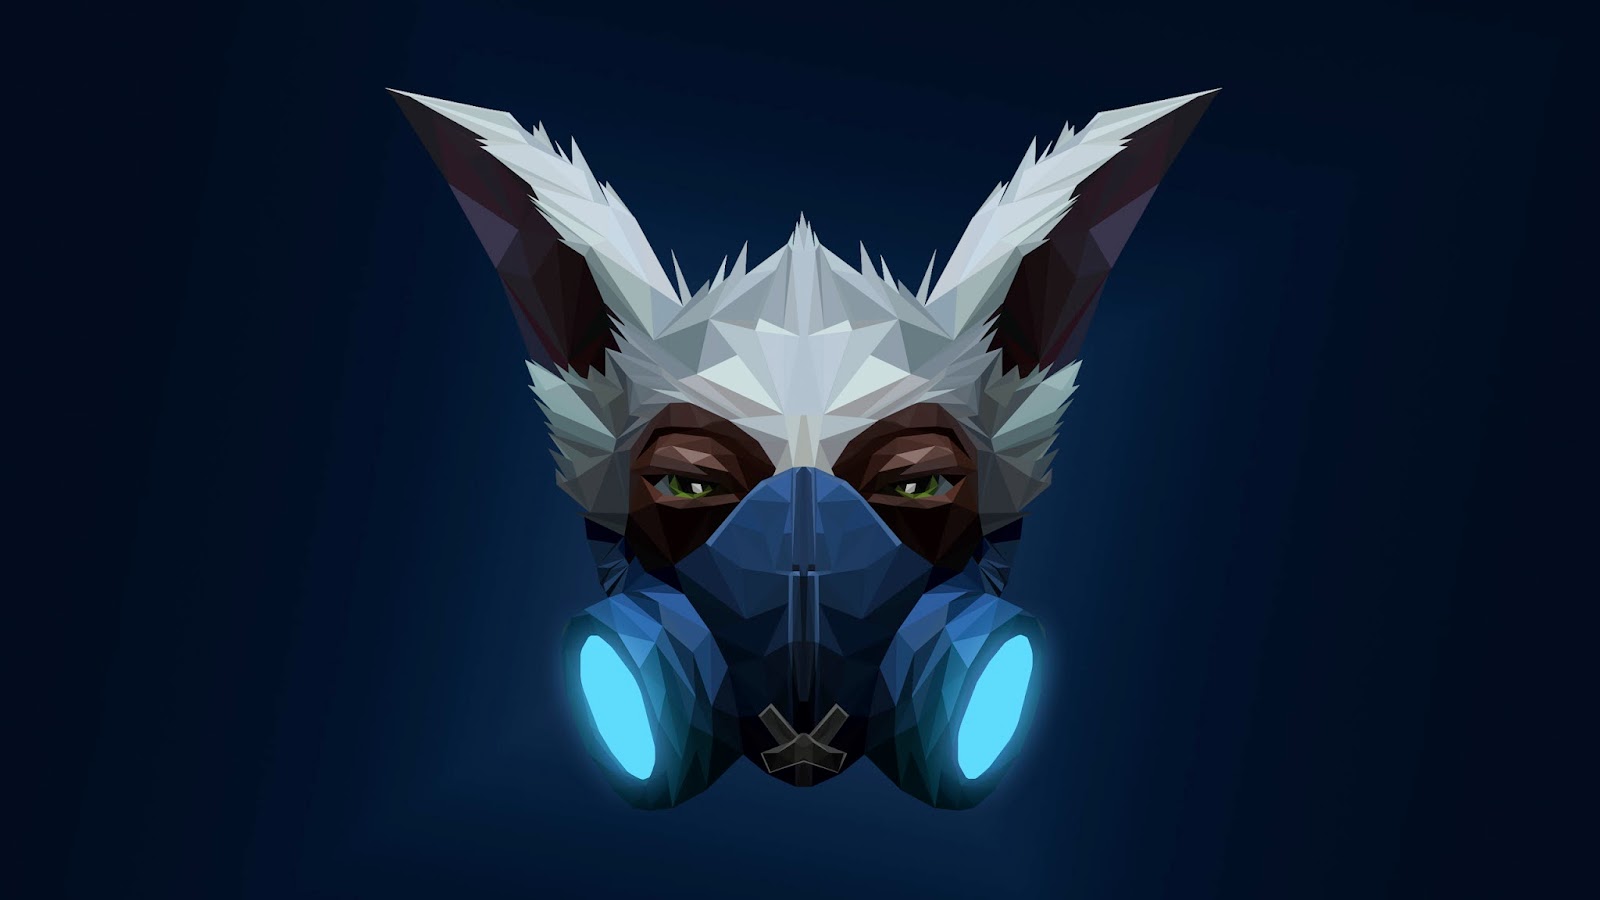 The Lowpoly Project: Meepo Dota 2 Low Poly Art